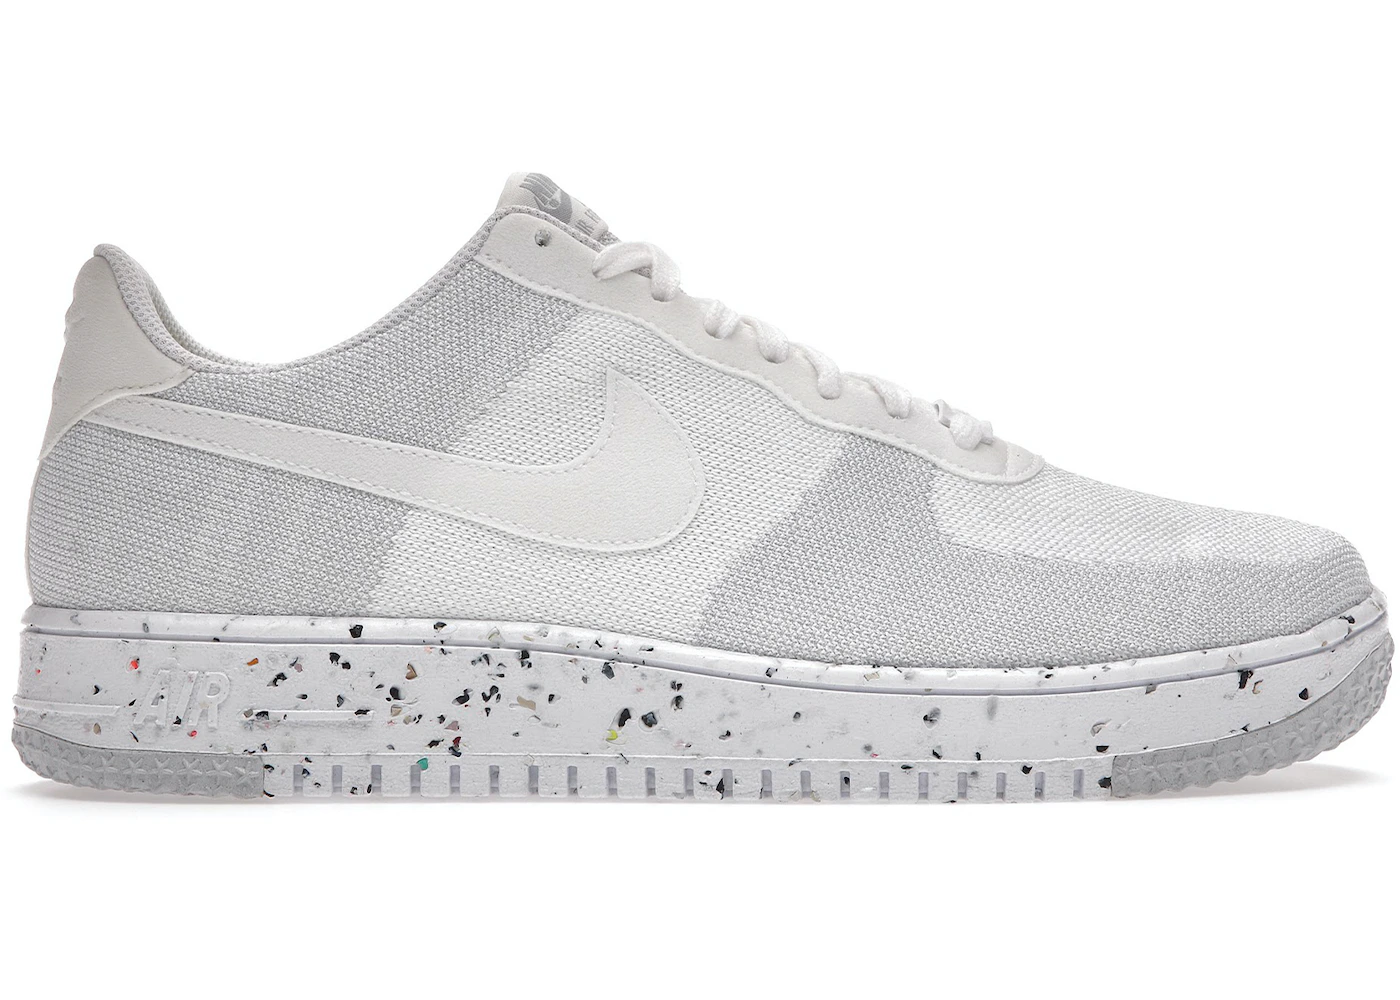 Pluche pop Previs site Veroveren Nike Air Force 1 Low Crater Flyknit White - DC4831-100 - US